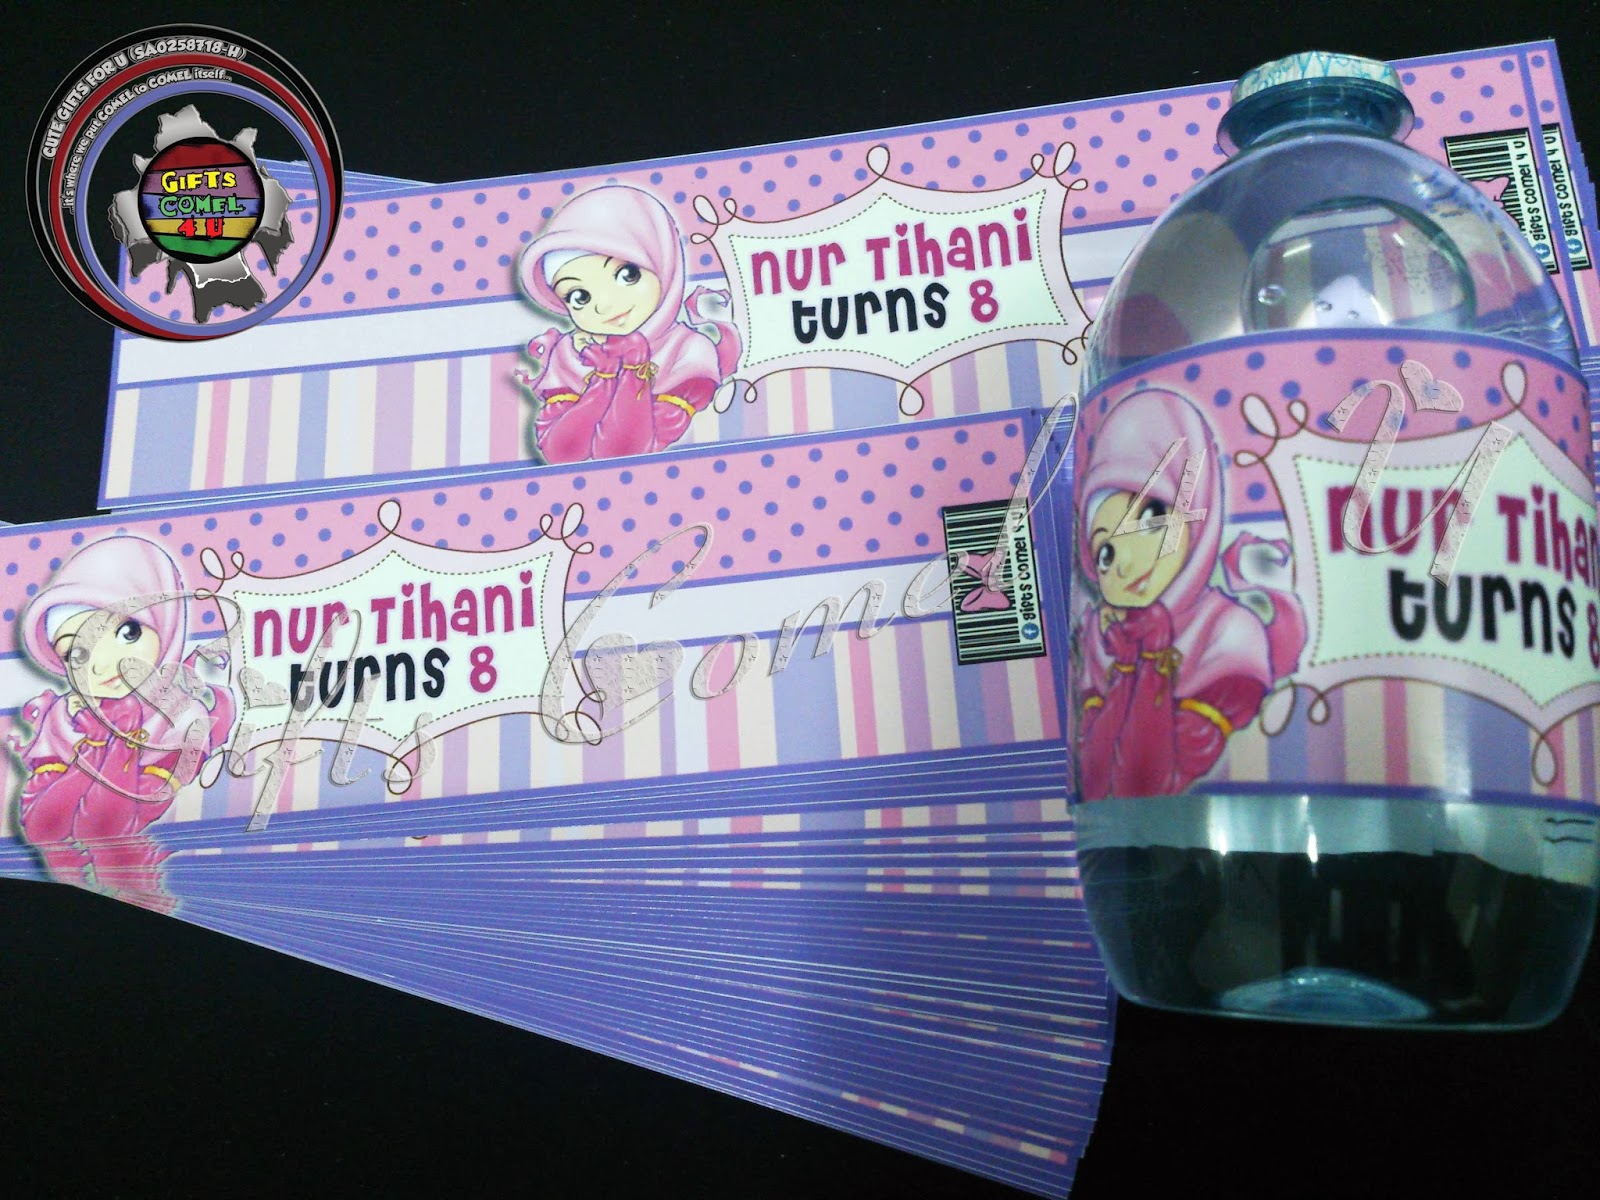 Gifts Comel 4 U: Bottle Label with Personalized Wrapper